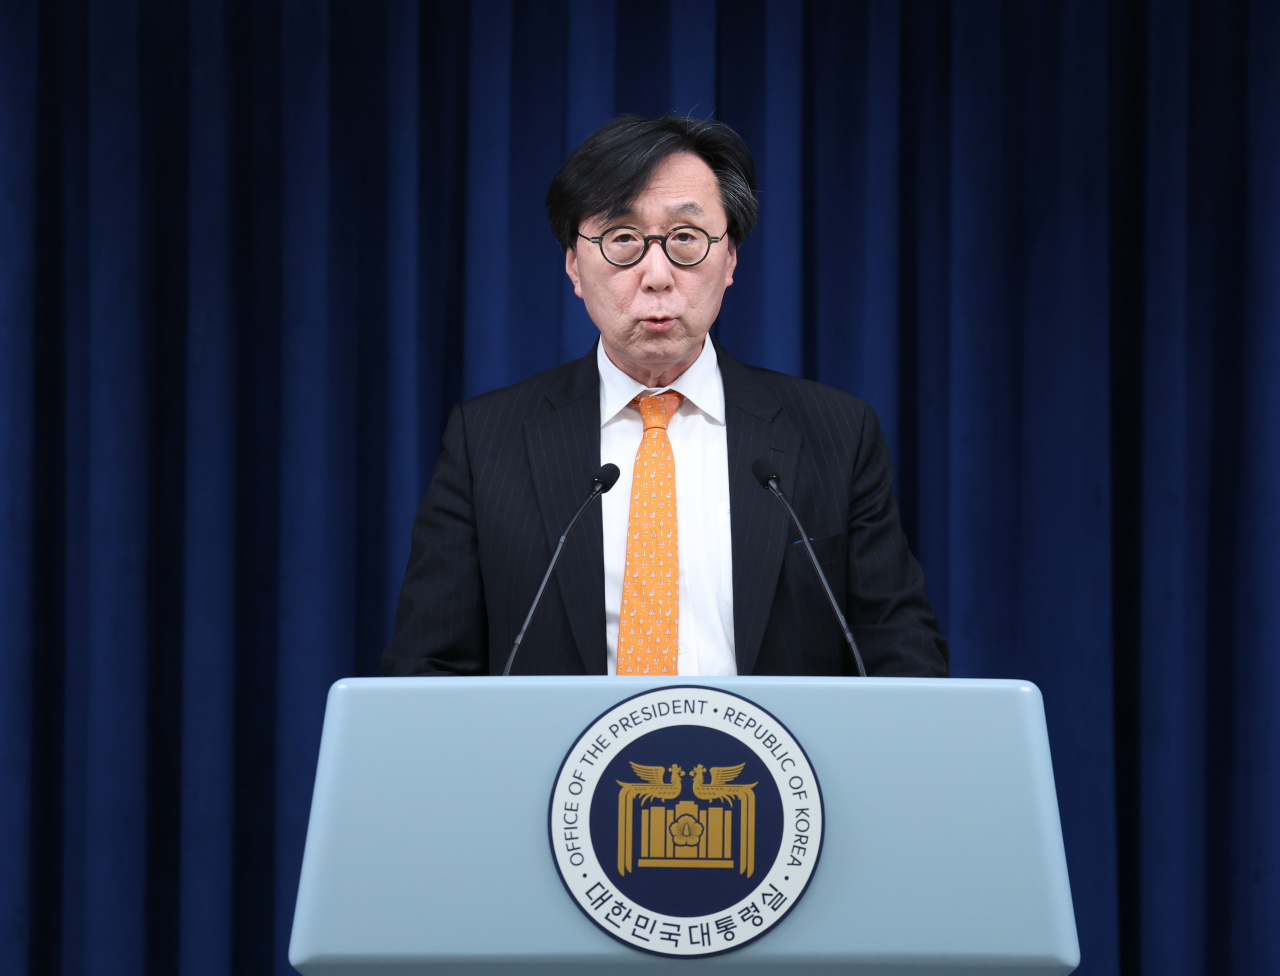 National security adviser Chang Ho-jin gives a briefing at the presidential office in Seoul on Thursday, regarding the Treaty on Comprehensive Strategic Partnership signed between North Korean leader Kim Jong-un and Russian President Vladimir Putin in Pyongyang the previous day. (Yonhap)